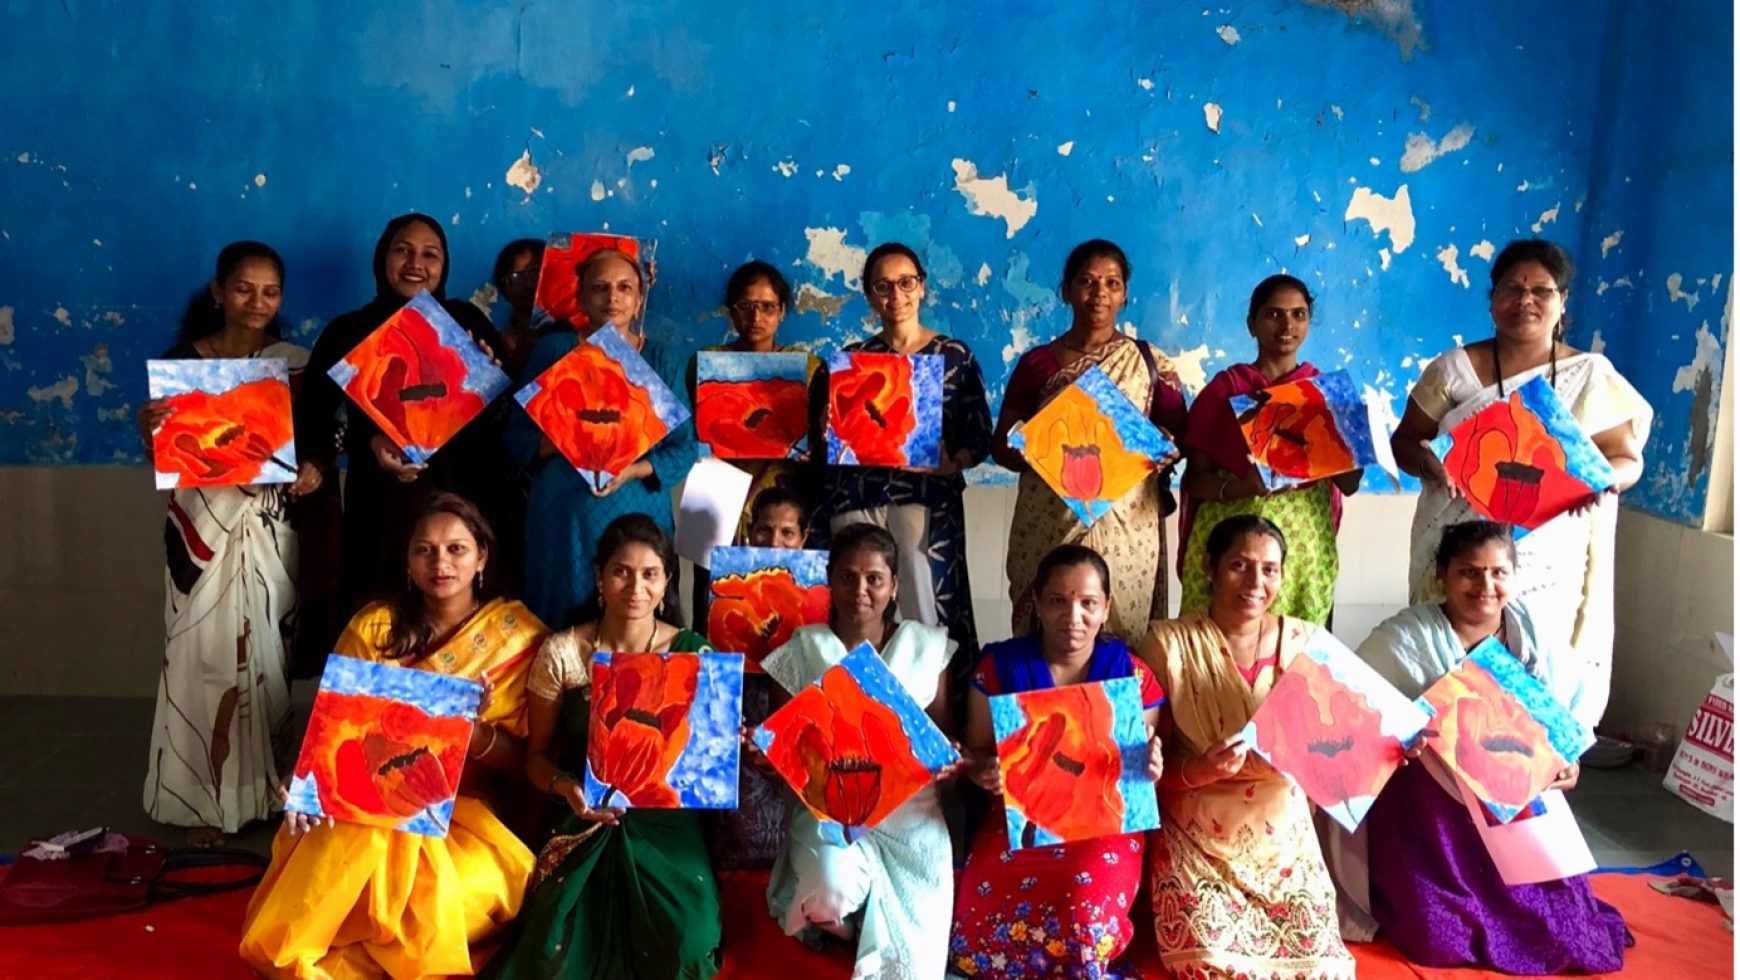 Women’s Day Painting workshop at Anand Nagar – Chembur